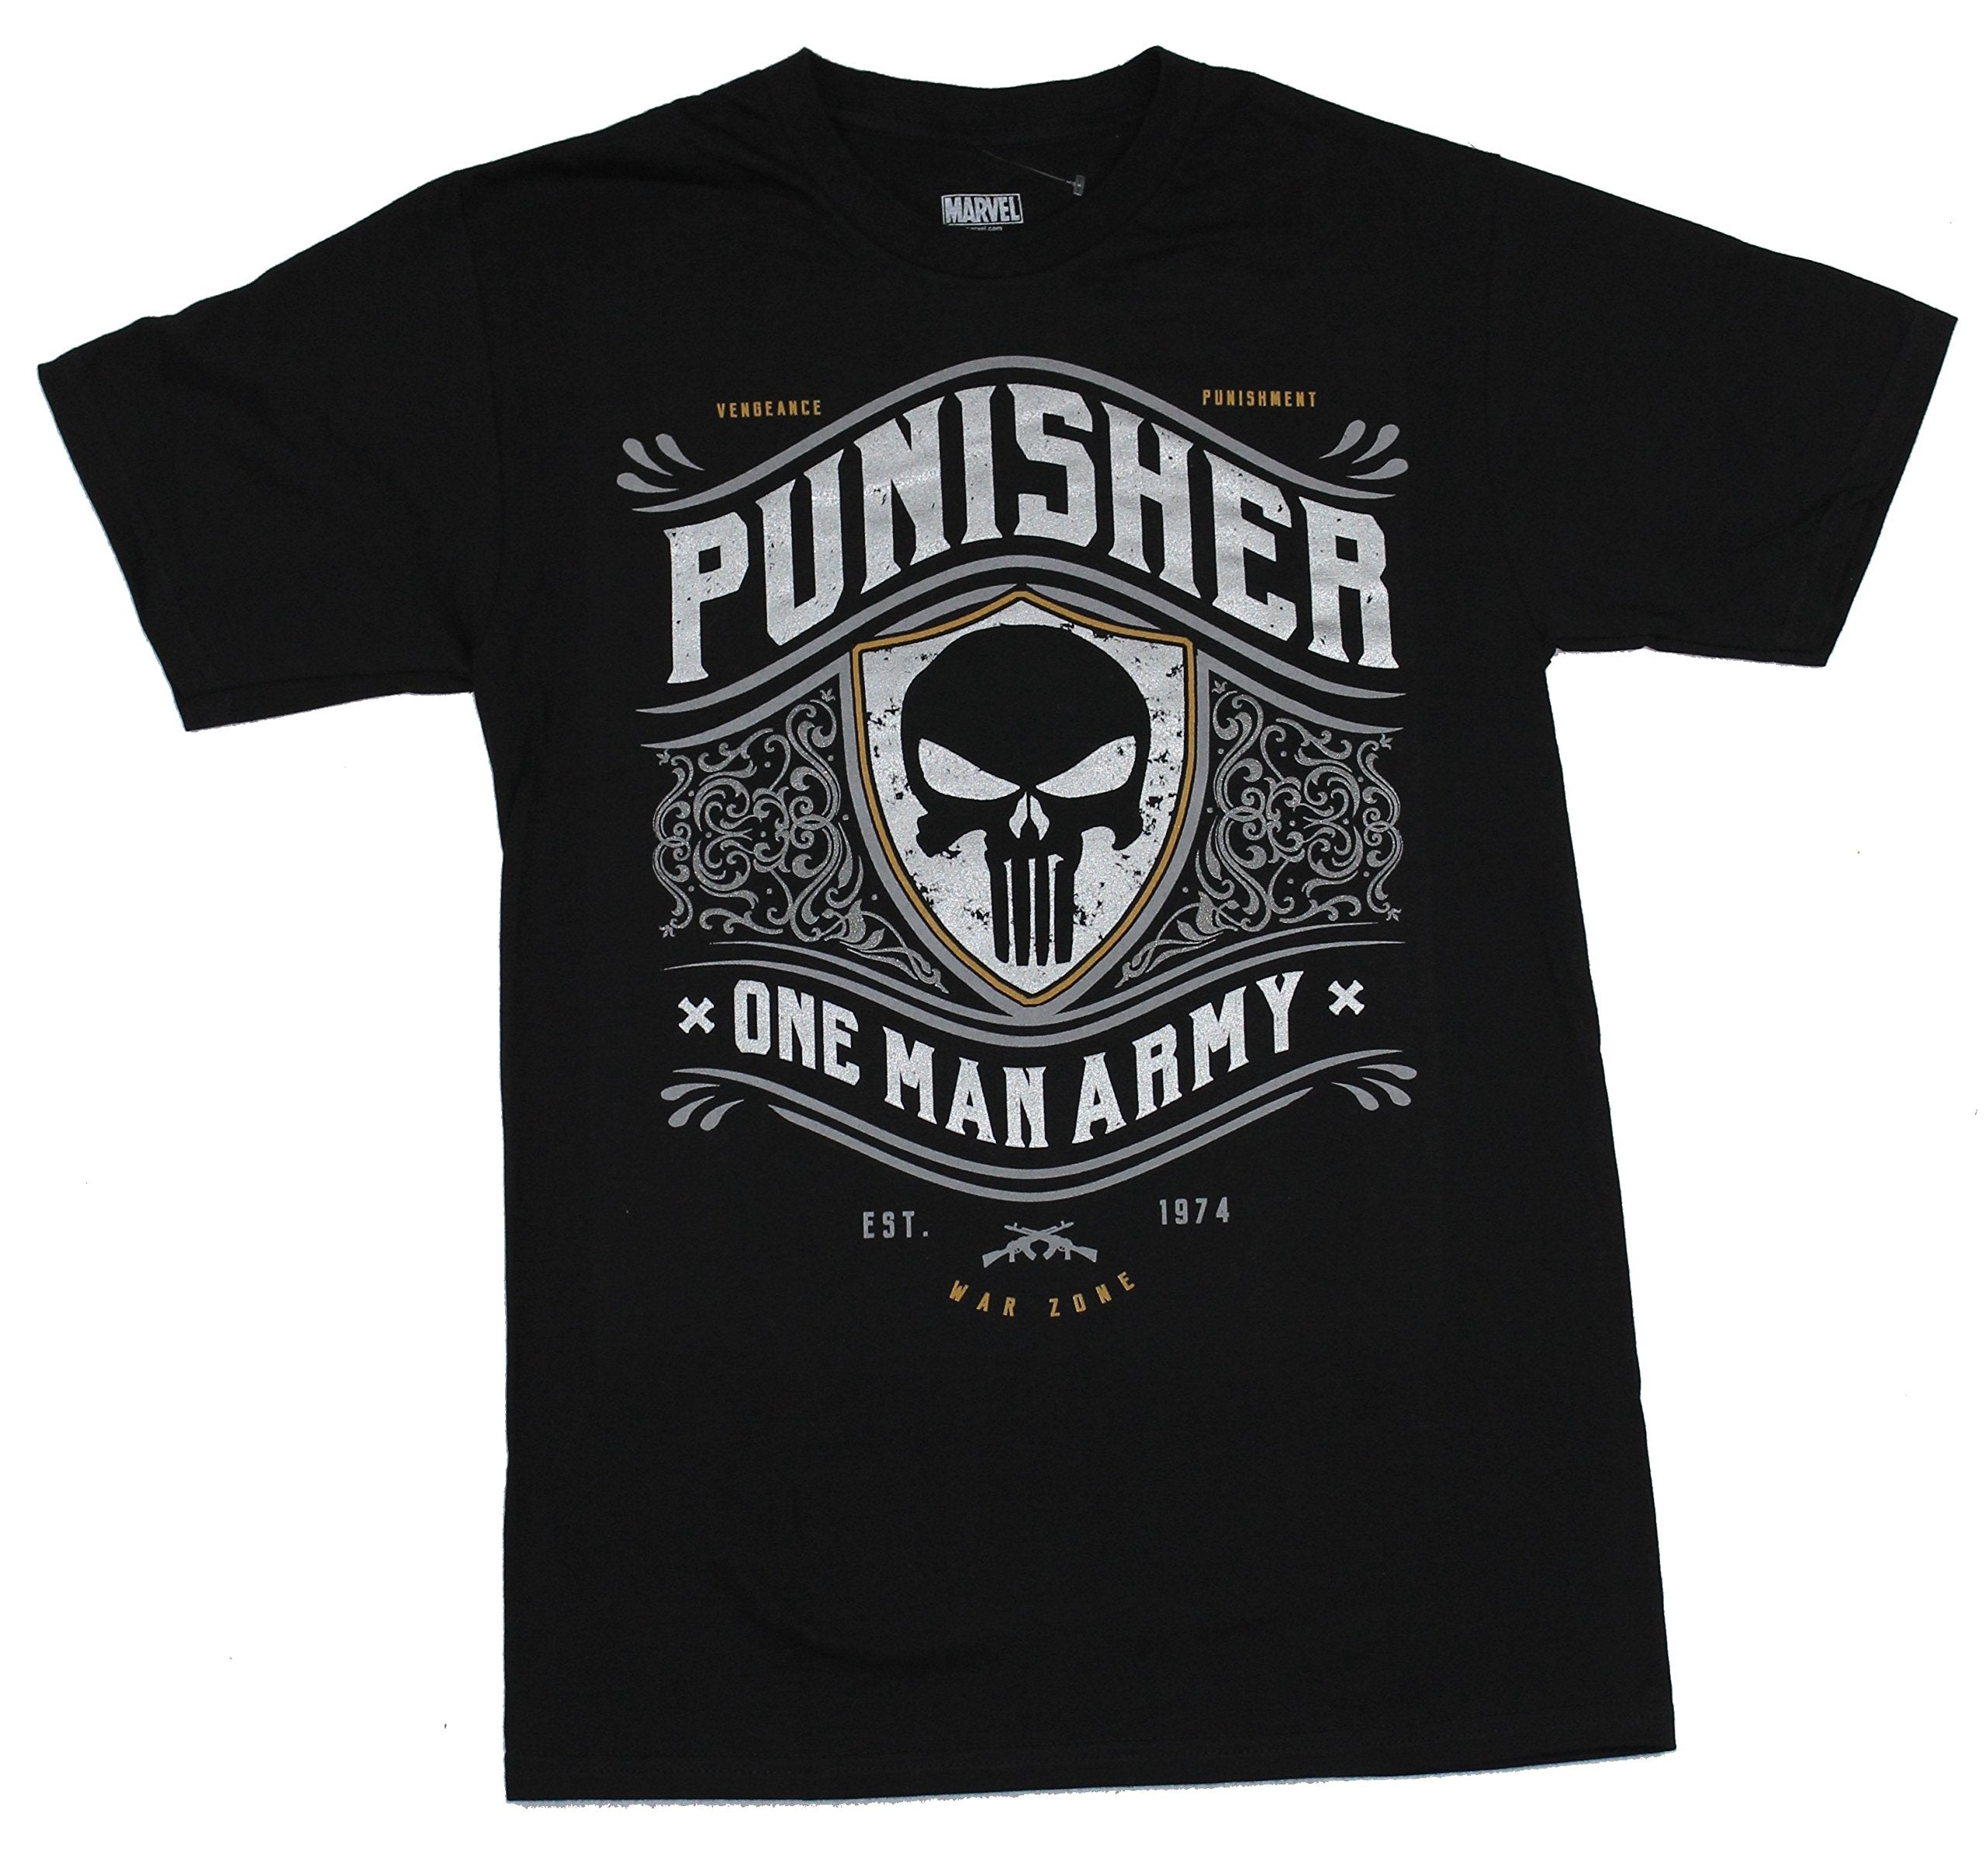 The Punisher (Marvel) Mens T-Shirt - One Man Army Silver Foil Ornate Design